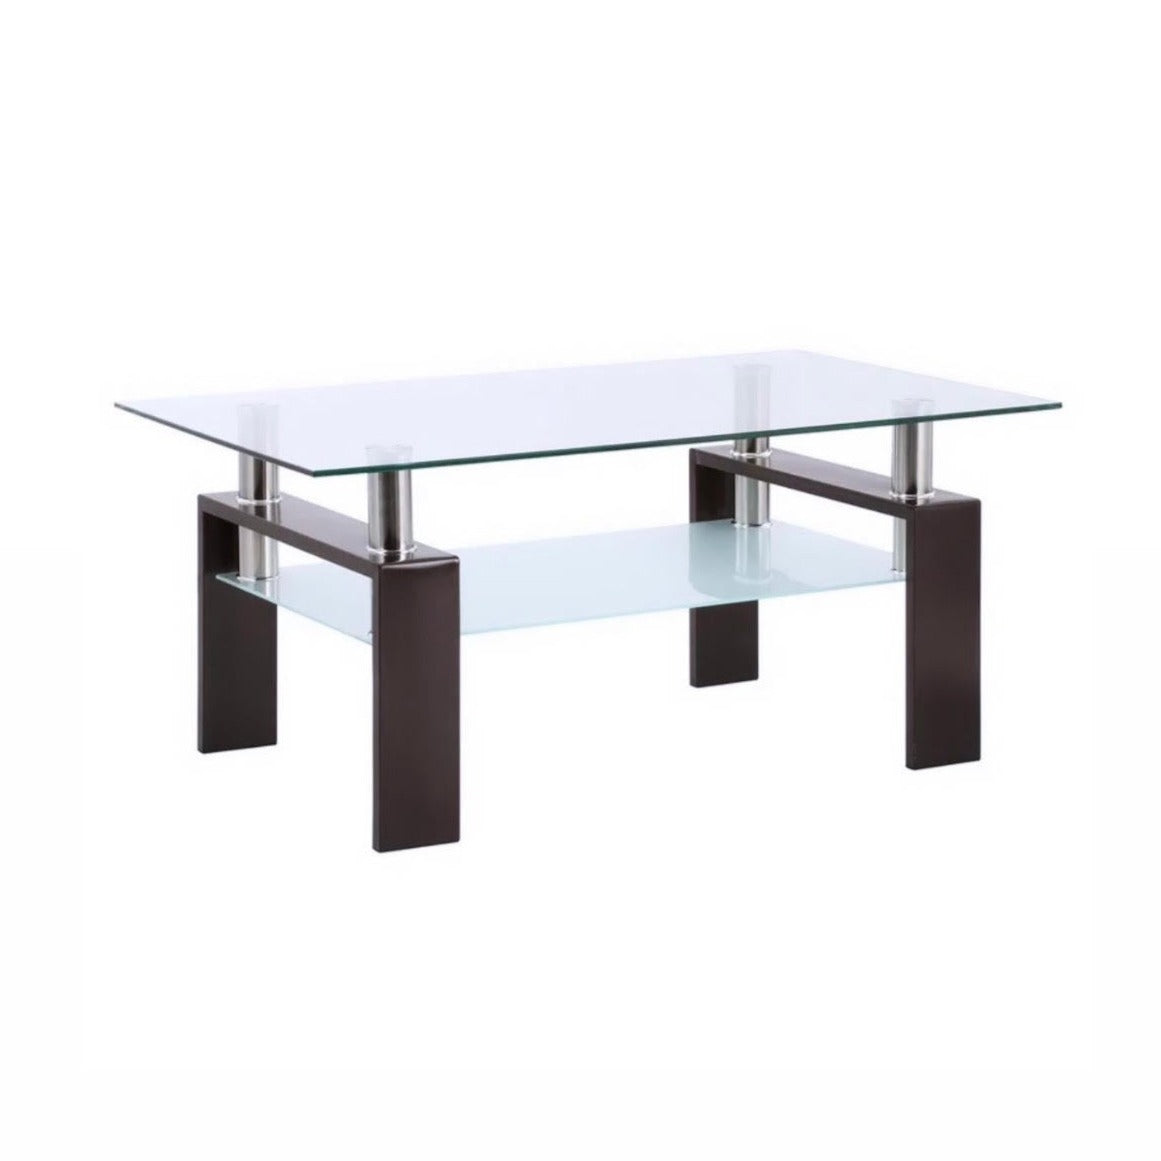 TABLE BASSE ANGELO BLANCHE